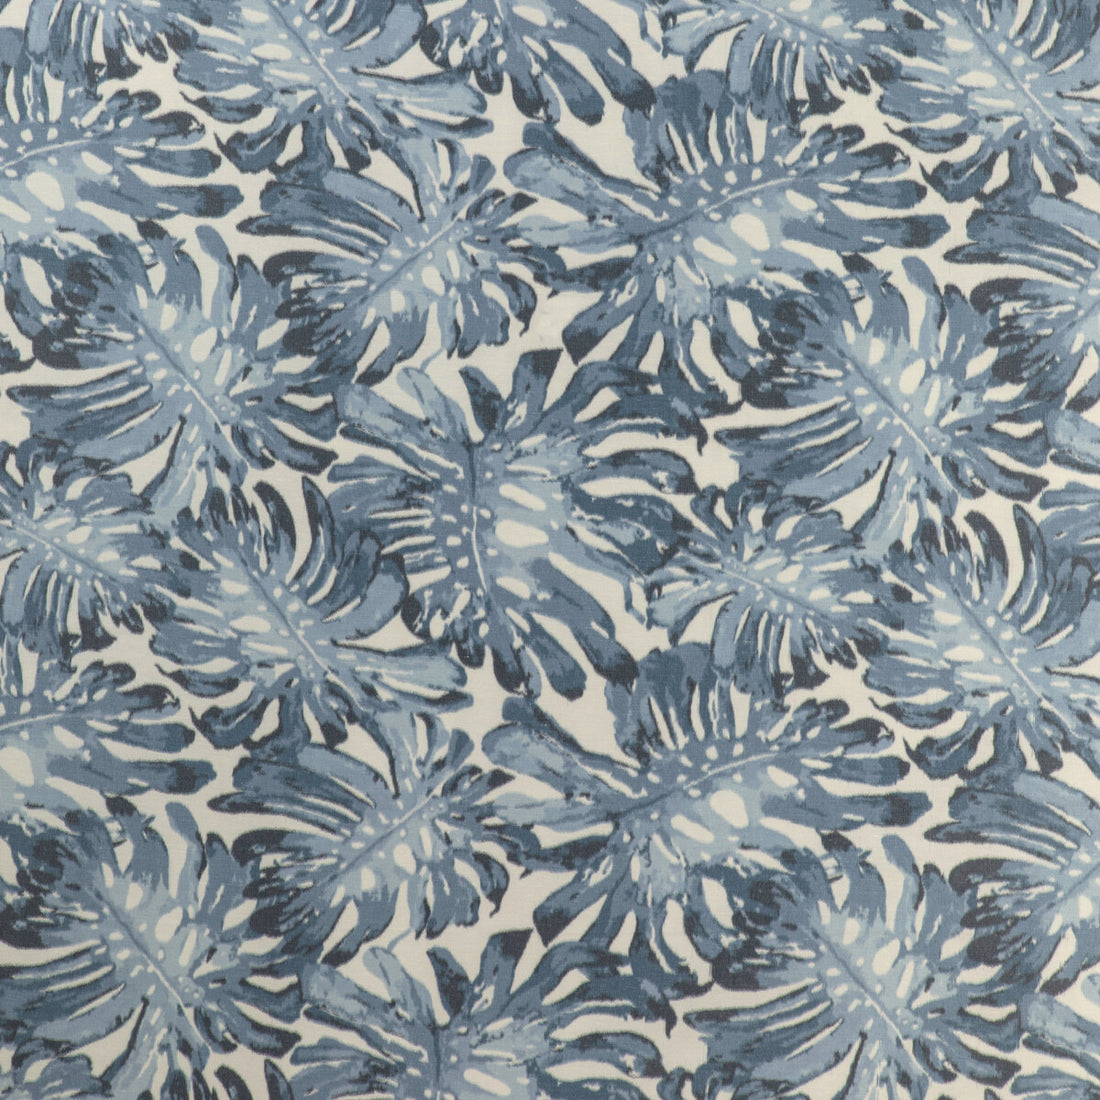 Calapan Print fabric in blue color - pattern 2020199.505.0 - by Lee Jofa in the Mindoro collection